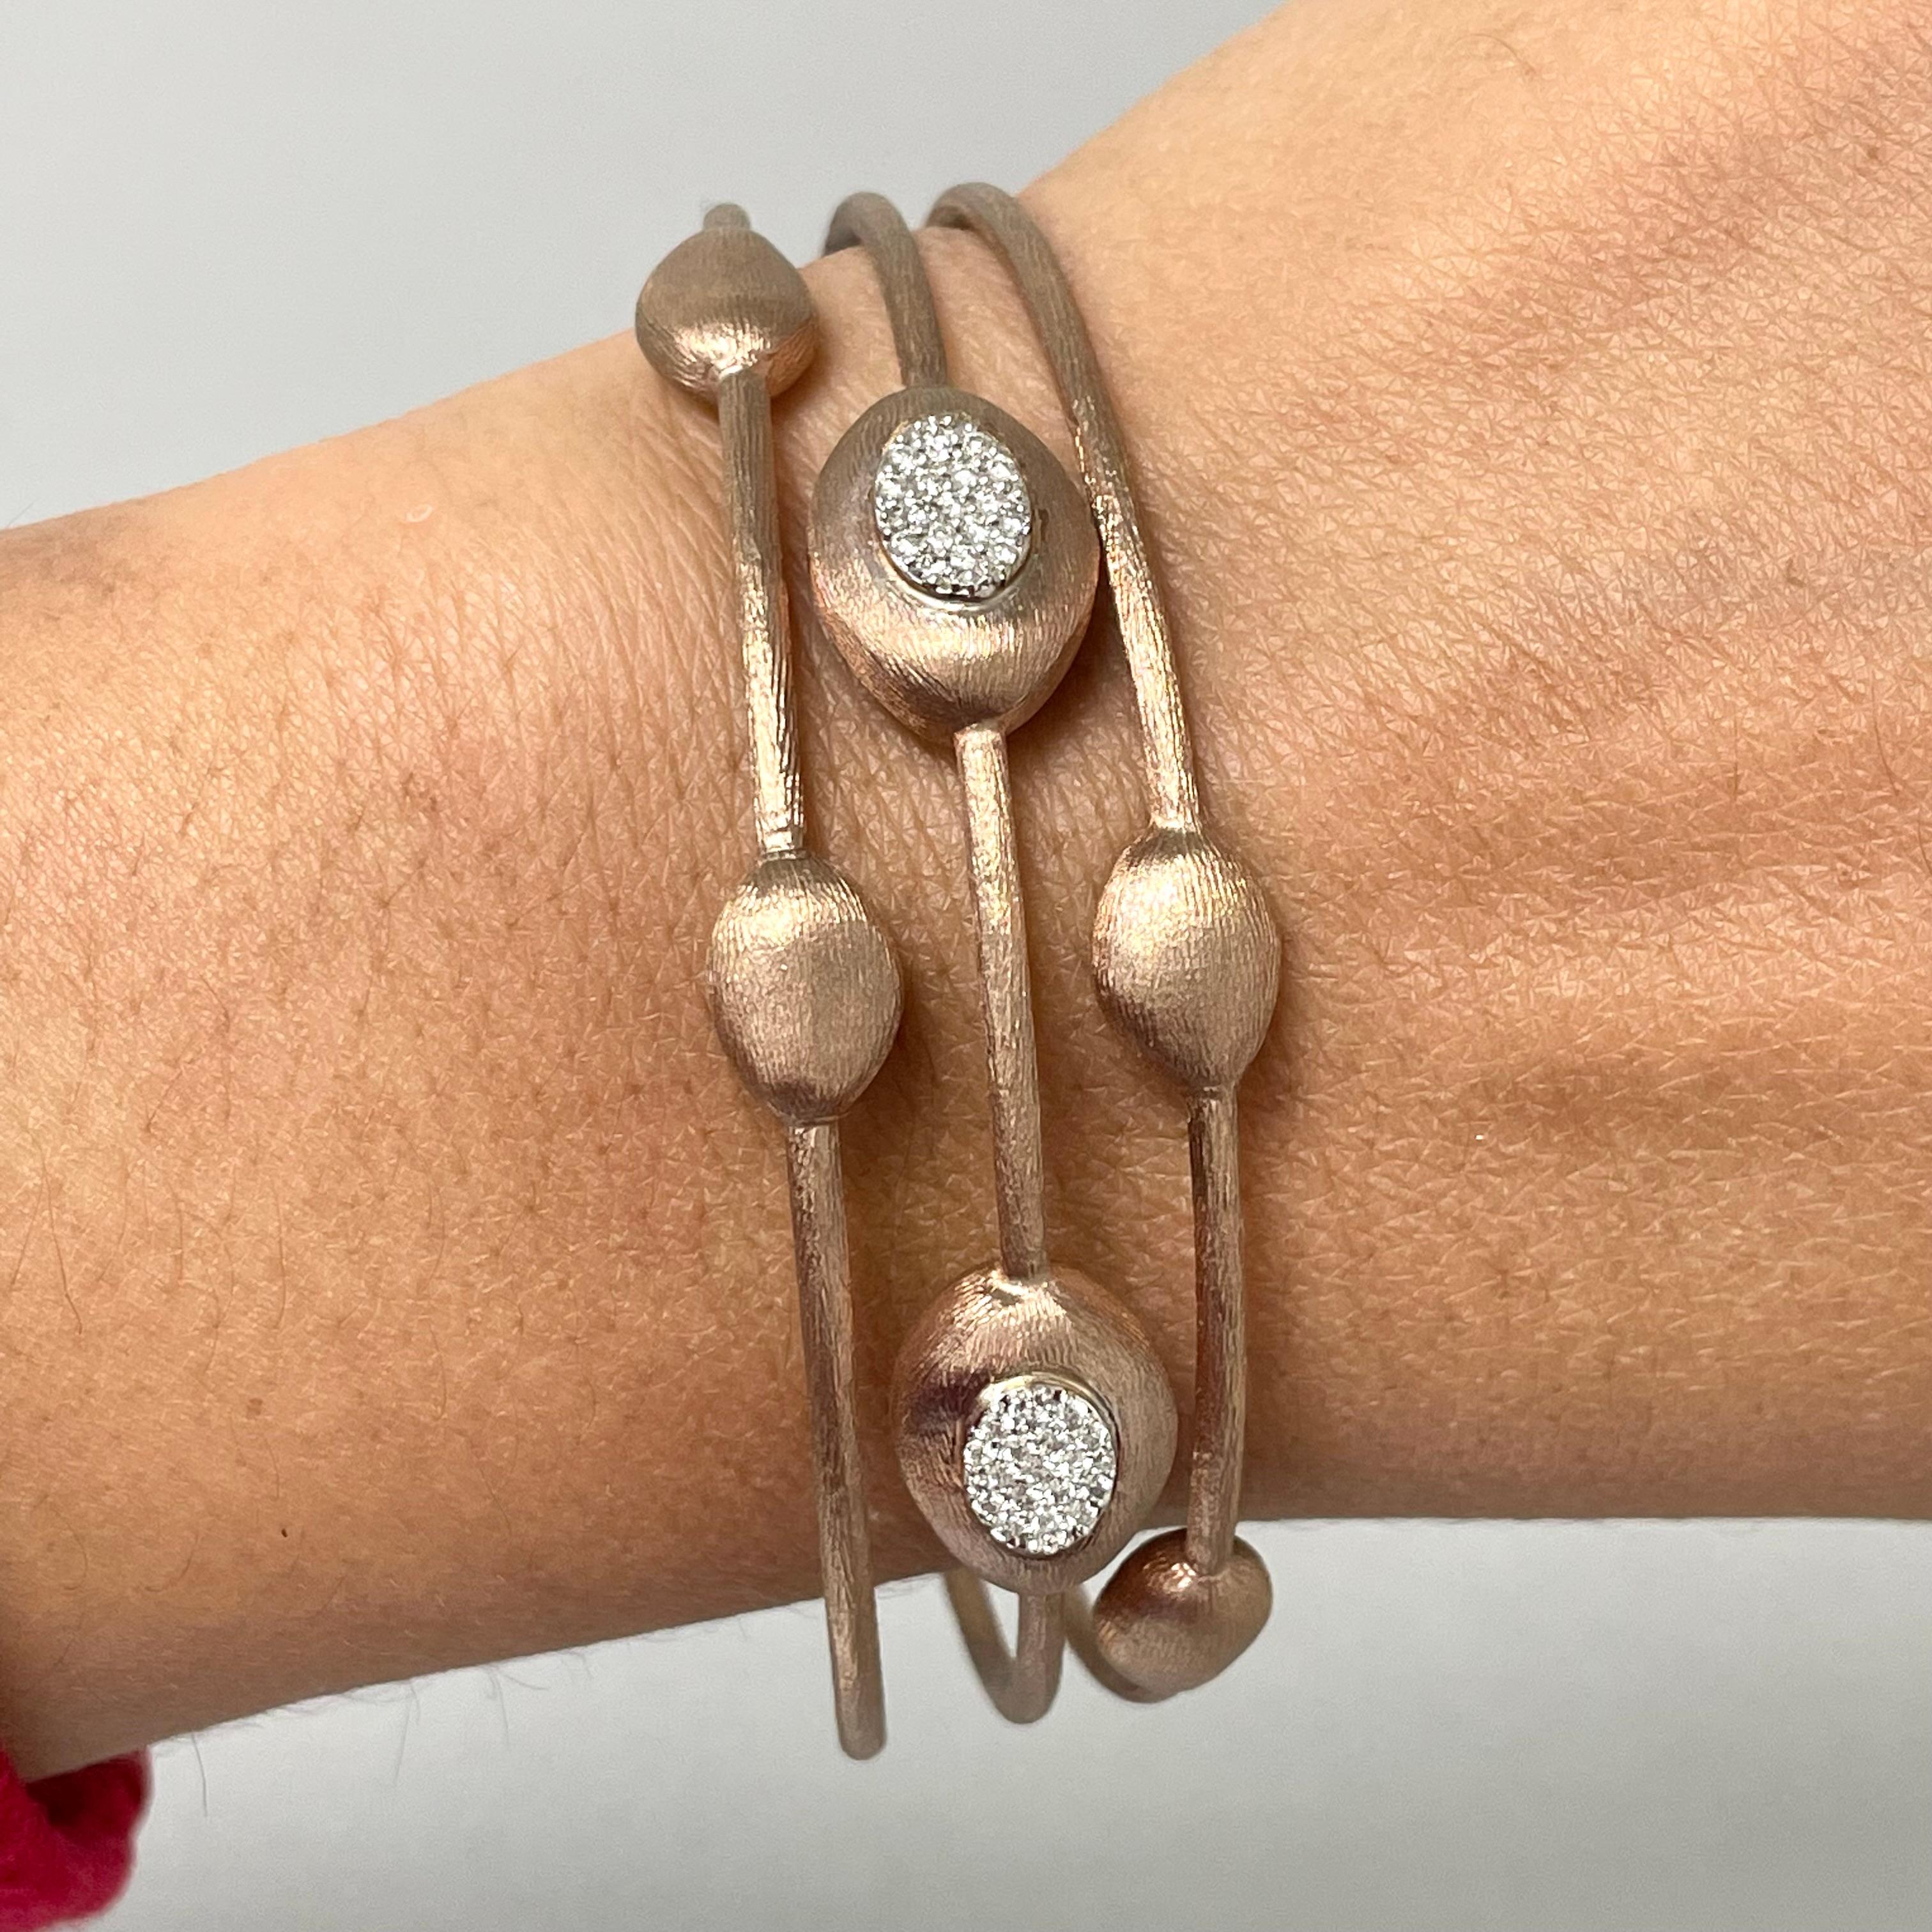 The Pulse Bangles have a unique metal styling giving them the feel of something antique or classical yet modern. They combine bold and delicate elements into a elegant piece of jewelry. 

Total Diamond Weight: 0.25 ct 
Diamond Color: G - H 
Diamond